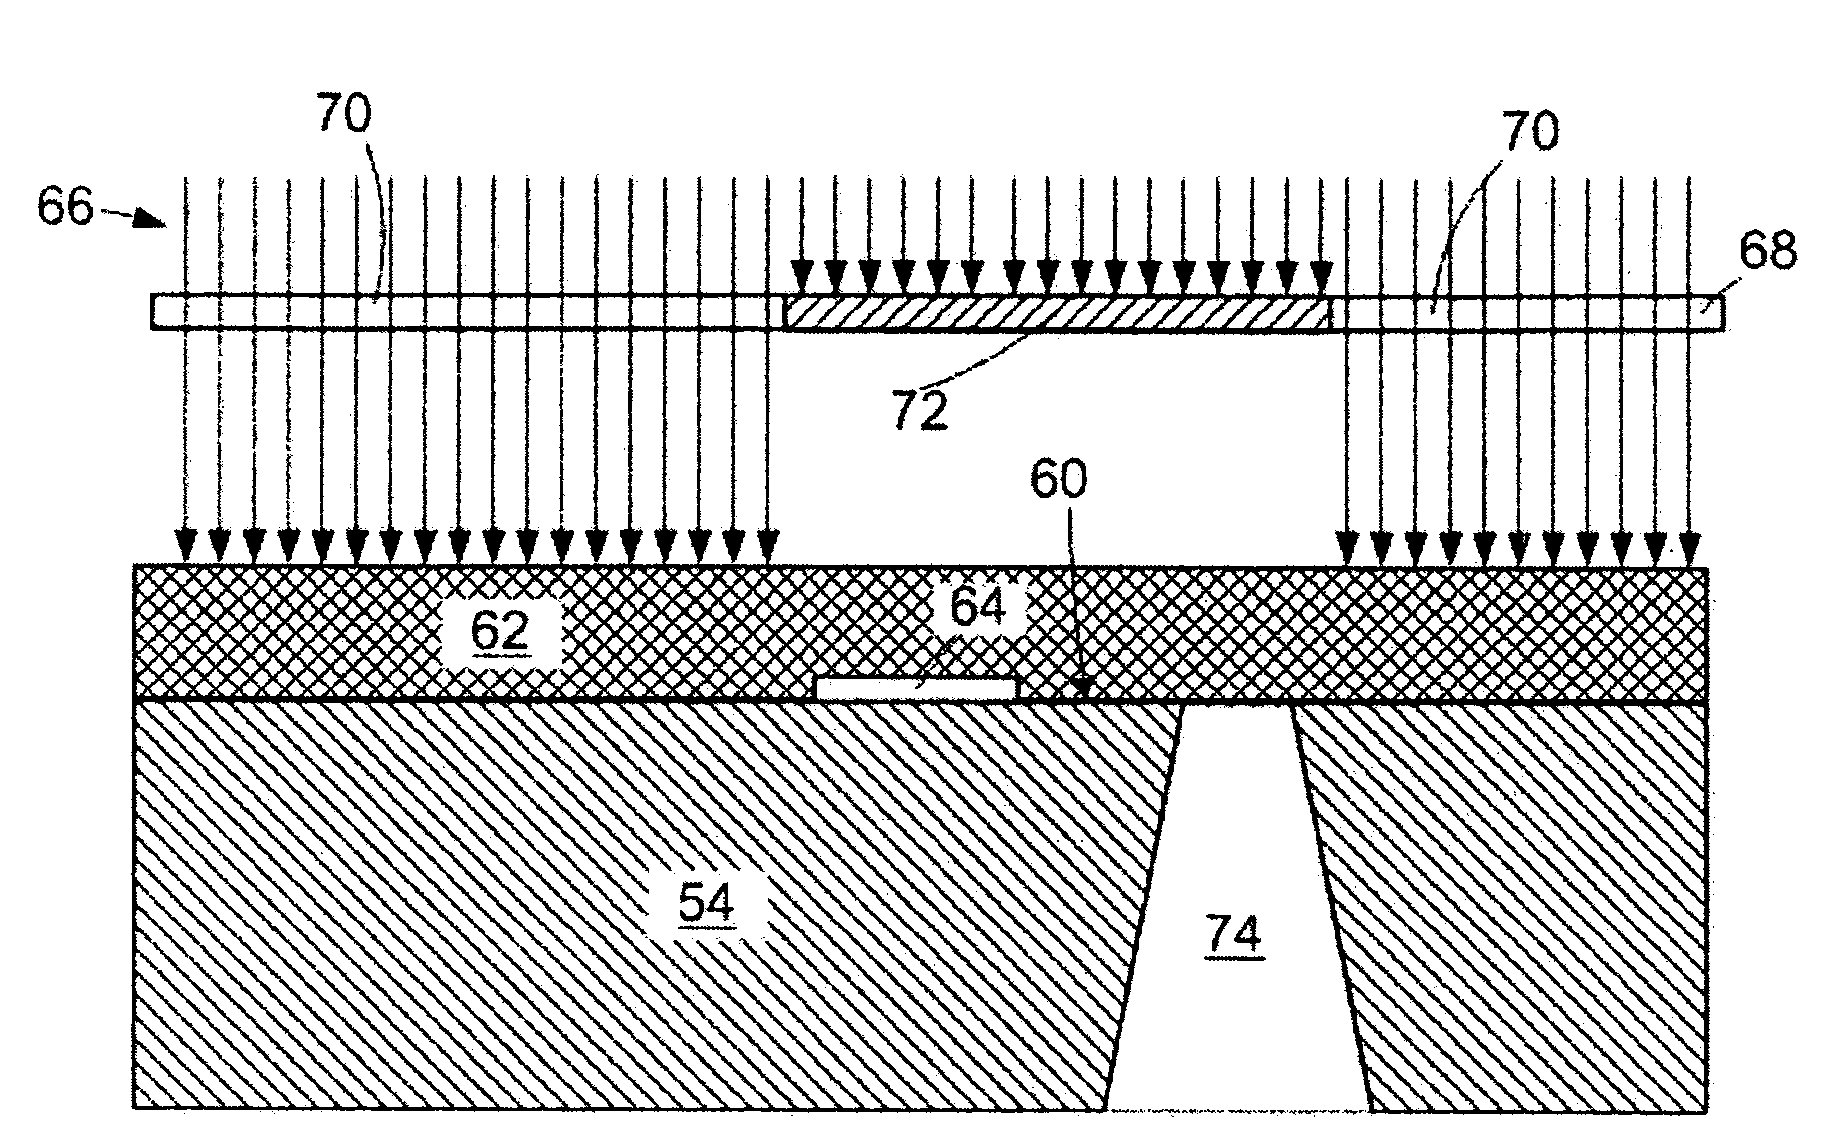 Dry film protoresist for a micro-fluid ejection head and method therefor